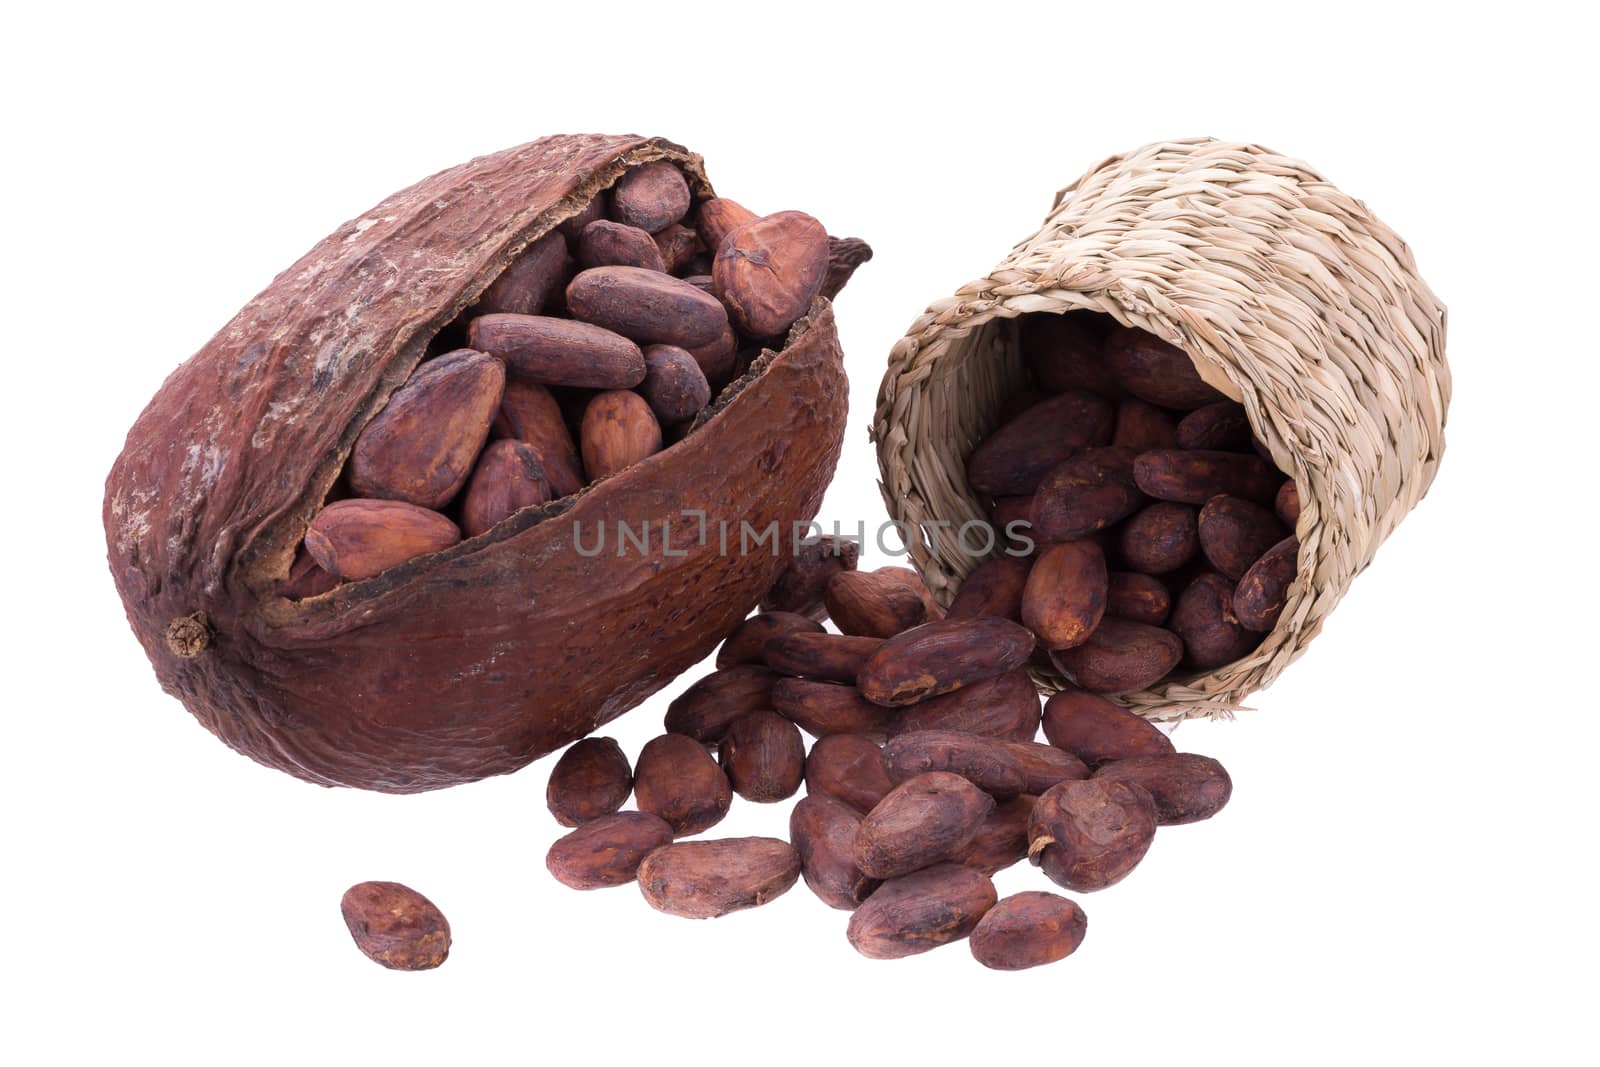 Cacao pods and beans isolated on white backgroun by kaiskynet